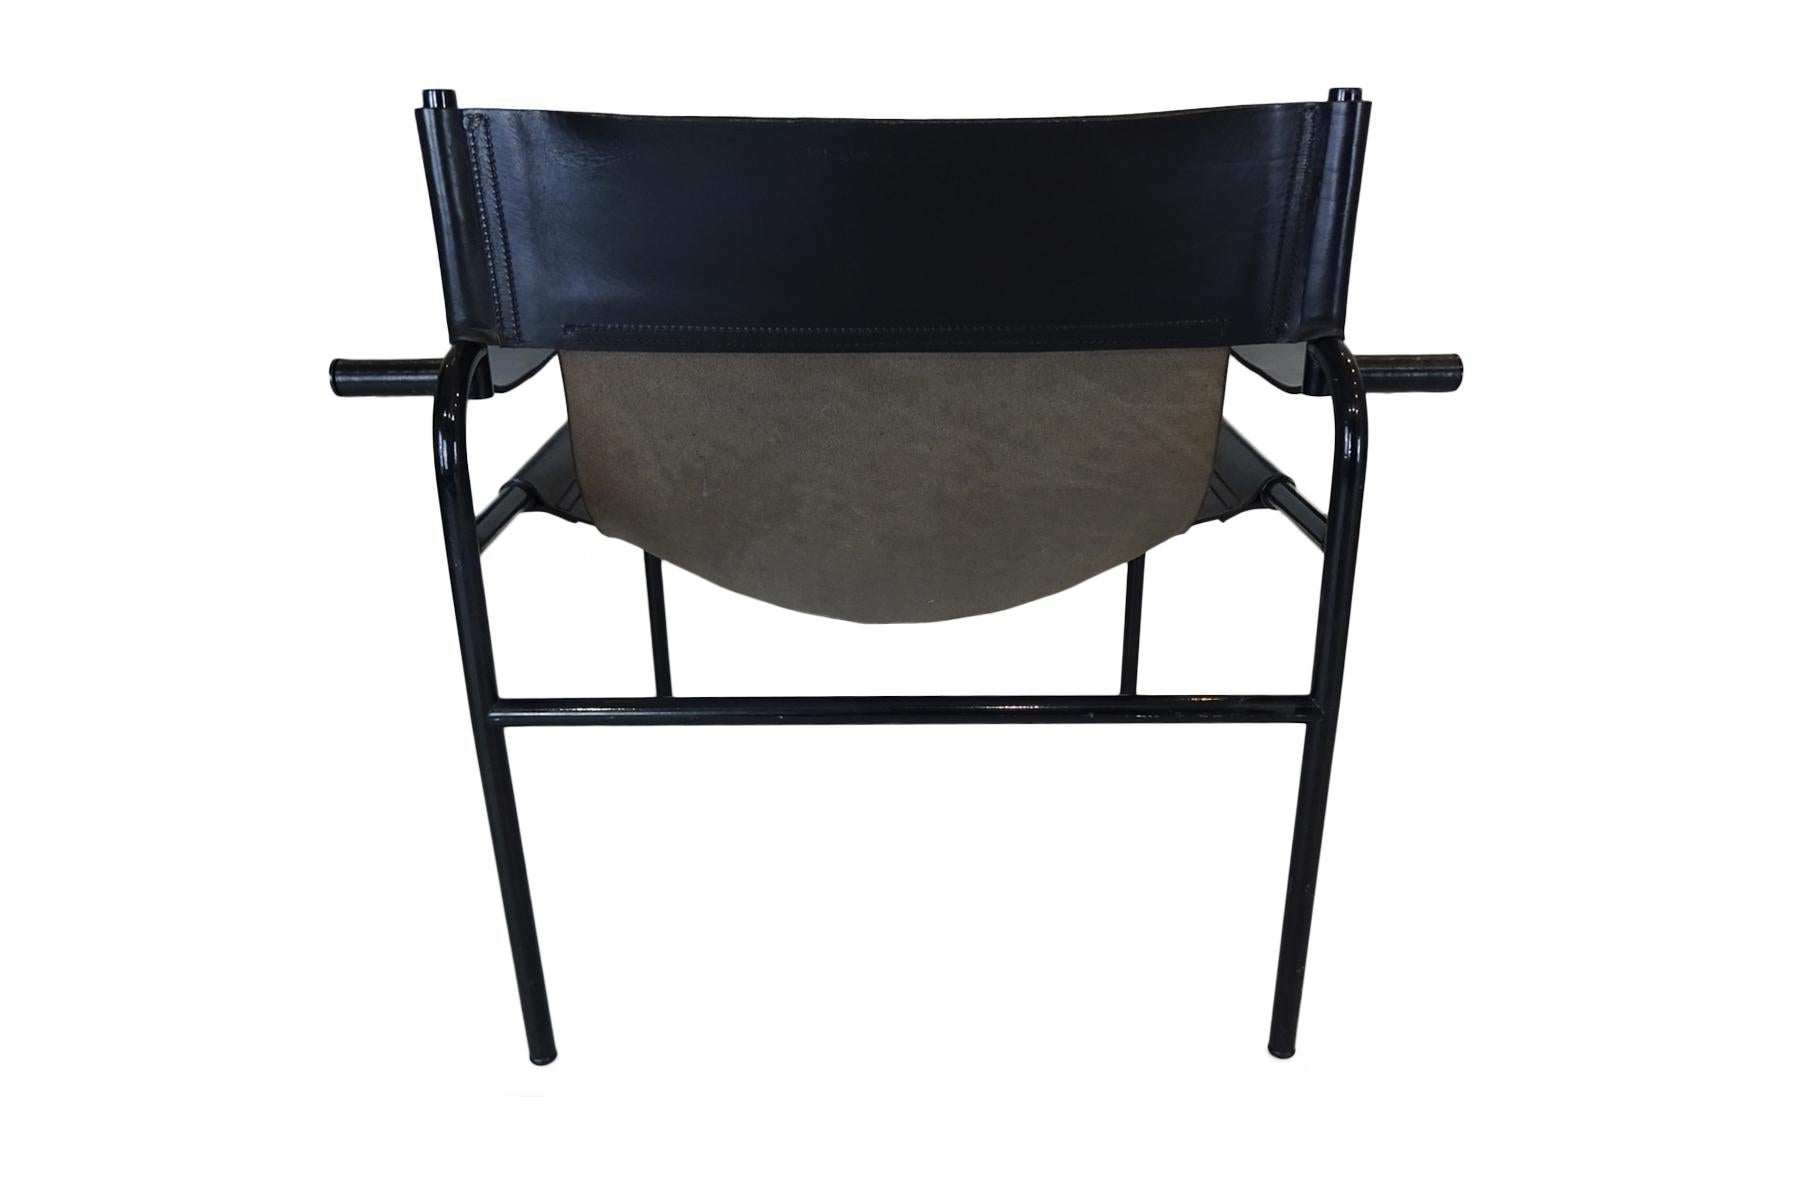 Dutch Midcentury Black Leather Lounge Chairs by Walter Antonis for ‘t Spectrum